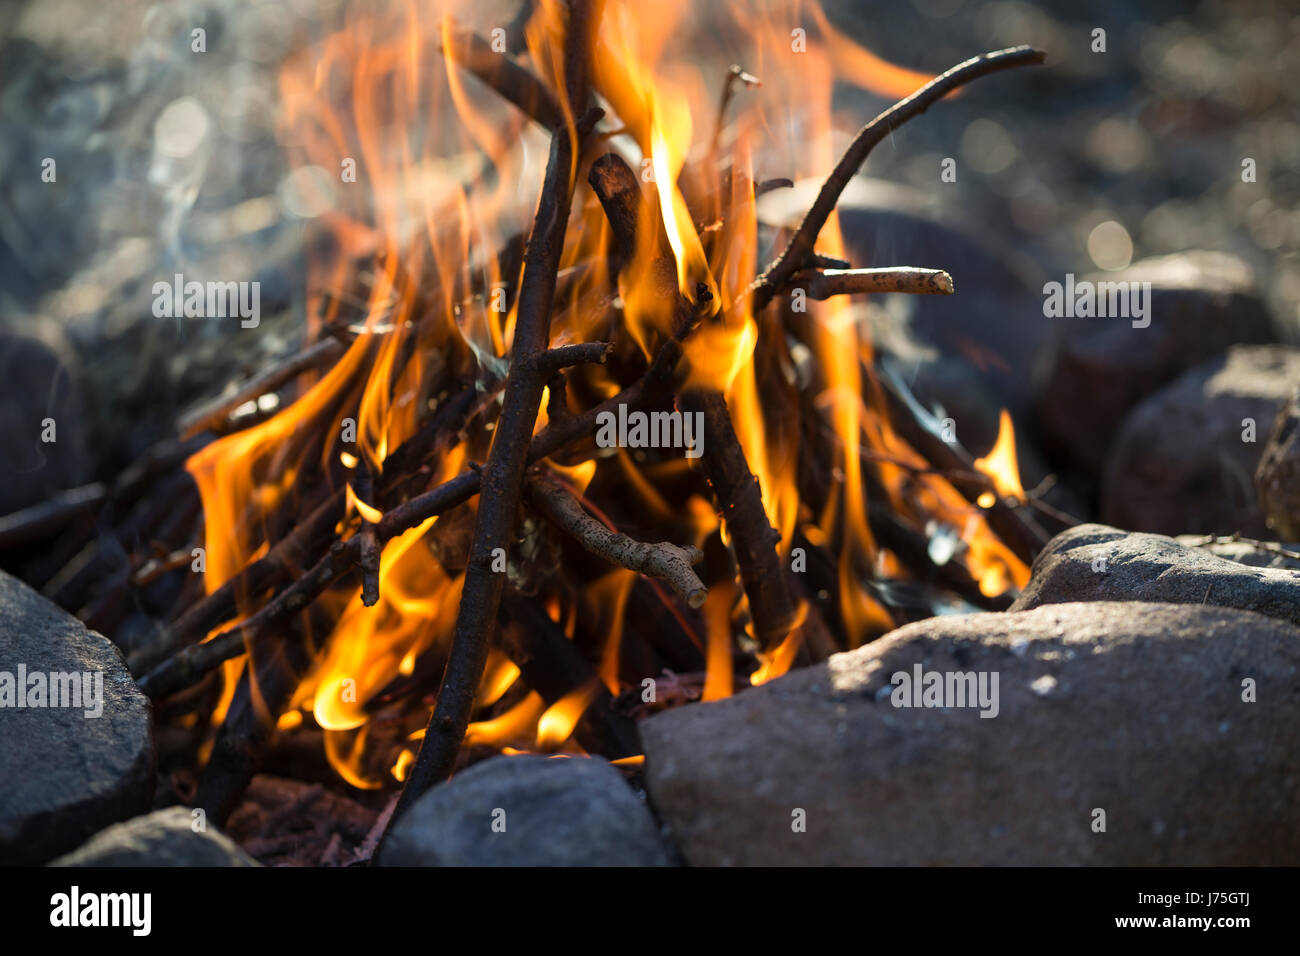 Lagerfeuer, Feuer, Outdoor, Feuerstelle, Campen, fuoco, falò, falò, camping Foto Stock